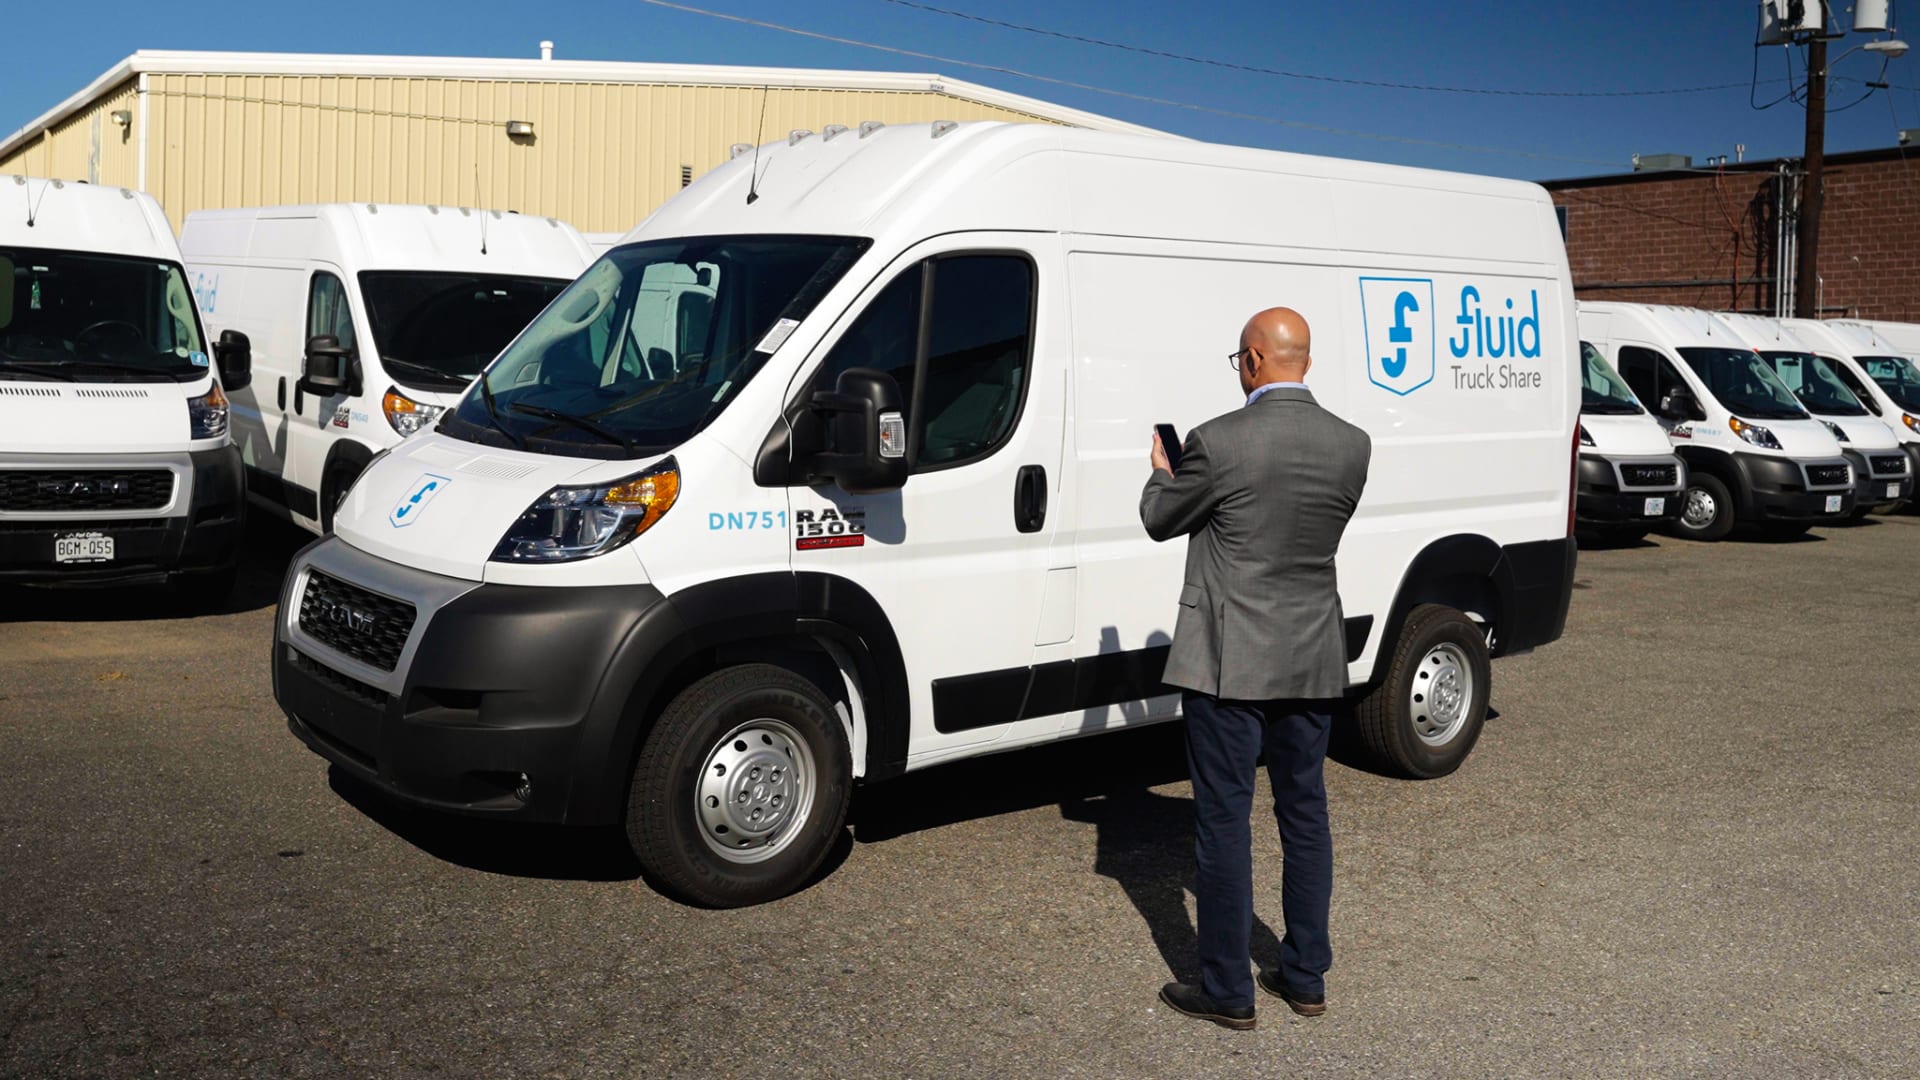 How a Search for a Bow Tie Turned Into a $65 Million Truck-Sharing Company